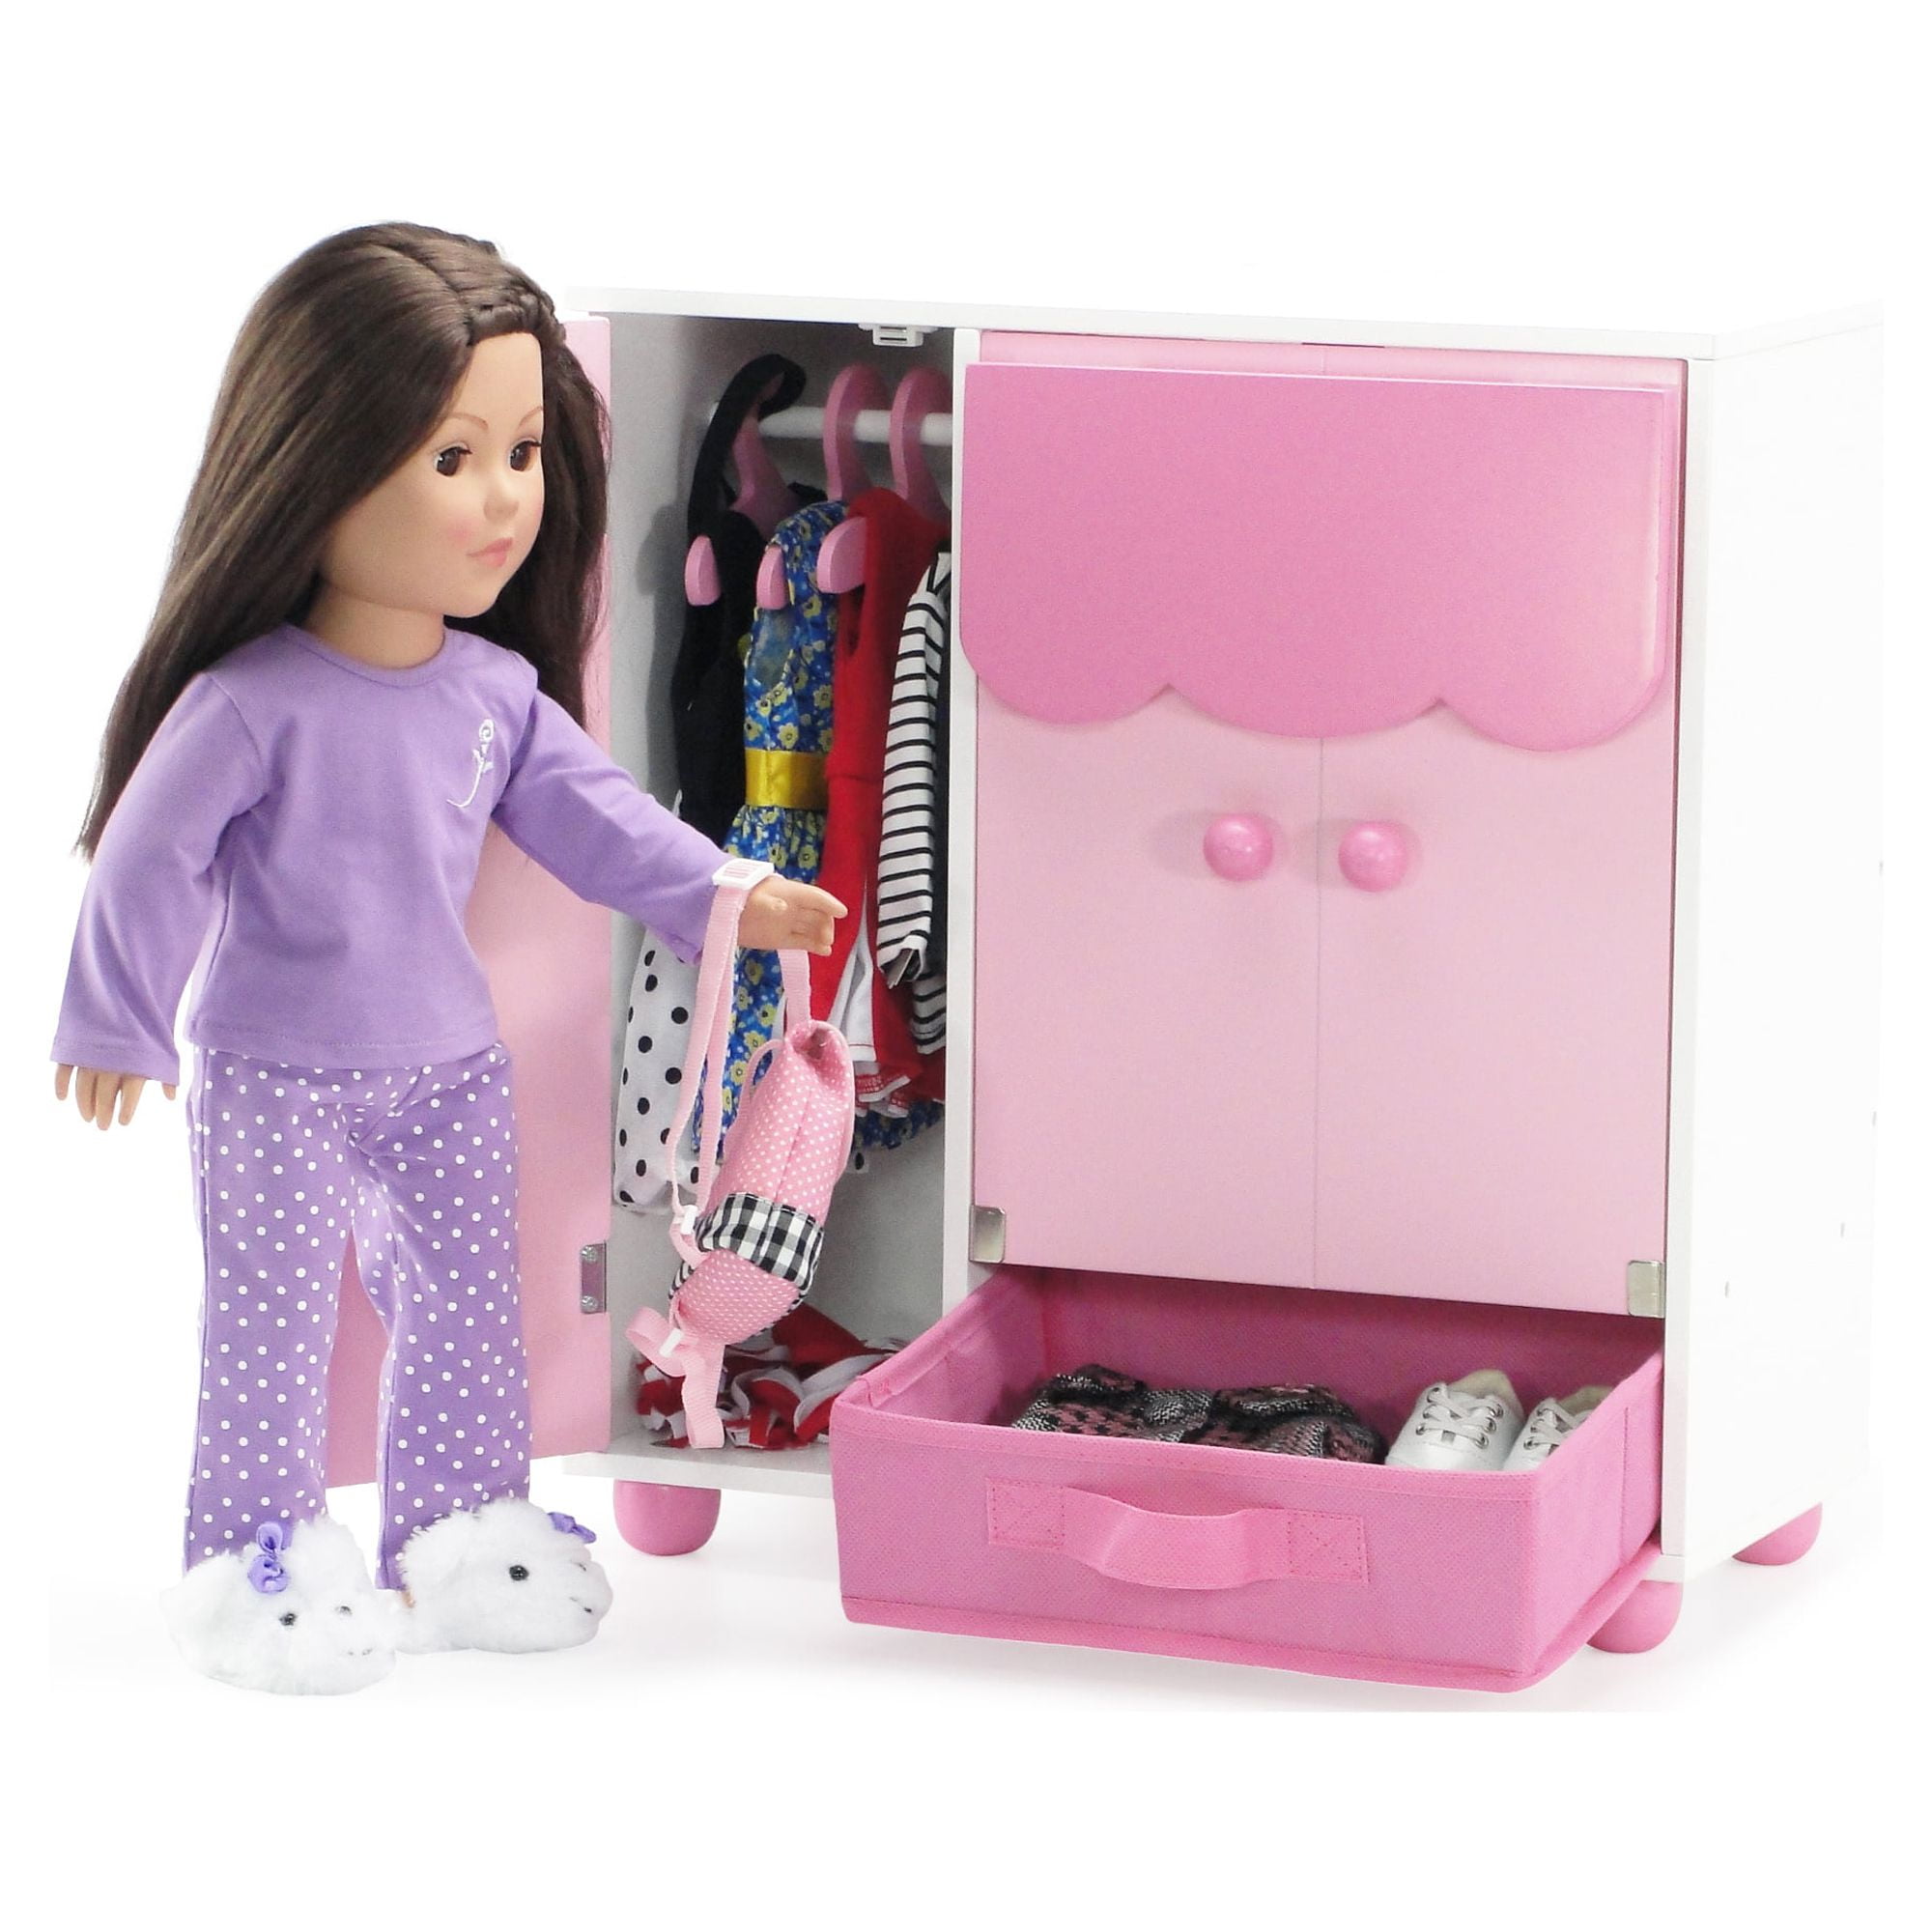 American Girl Archives - TheRoomMom